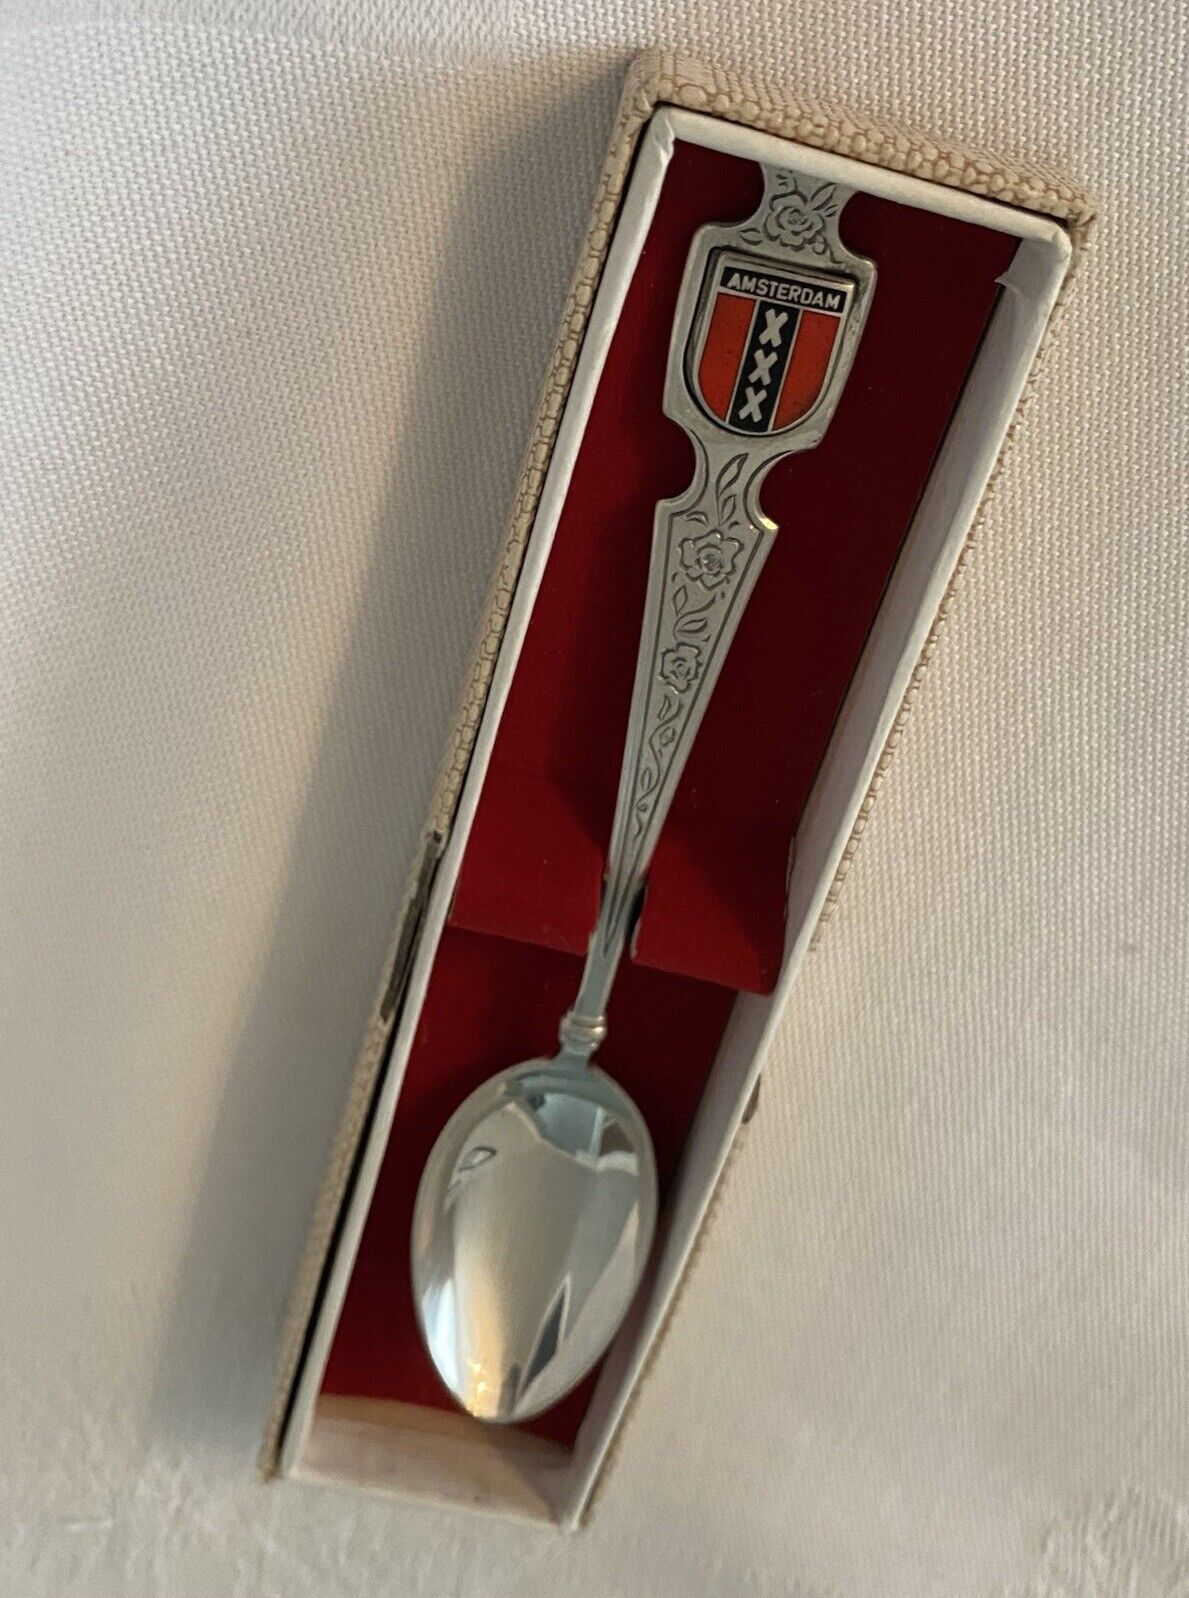 Vintage Holland Amsterdam Crest Souvenir Spoon With Box 4.75” Collectible